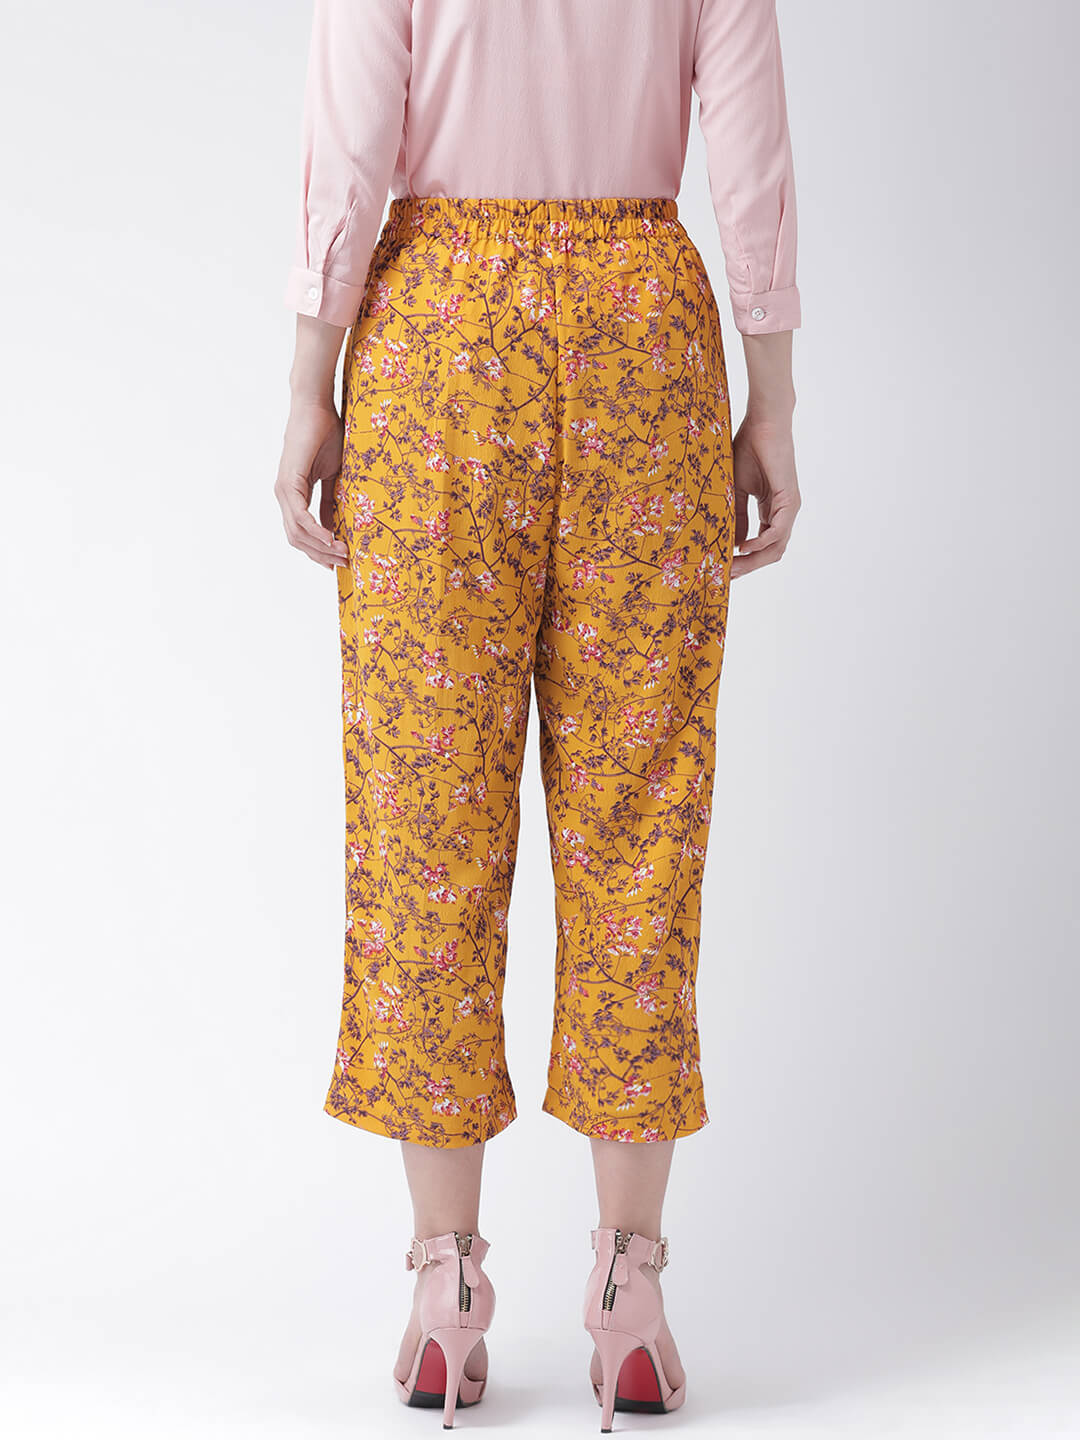 The Vanca'S Floral Culottes With Elasticated Waist And Two Pockets In The Front